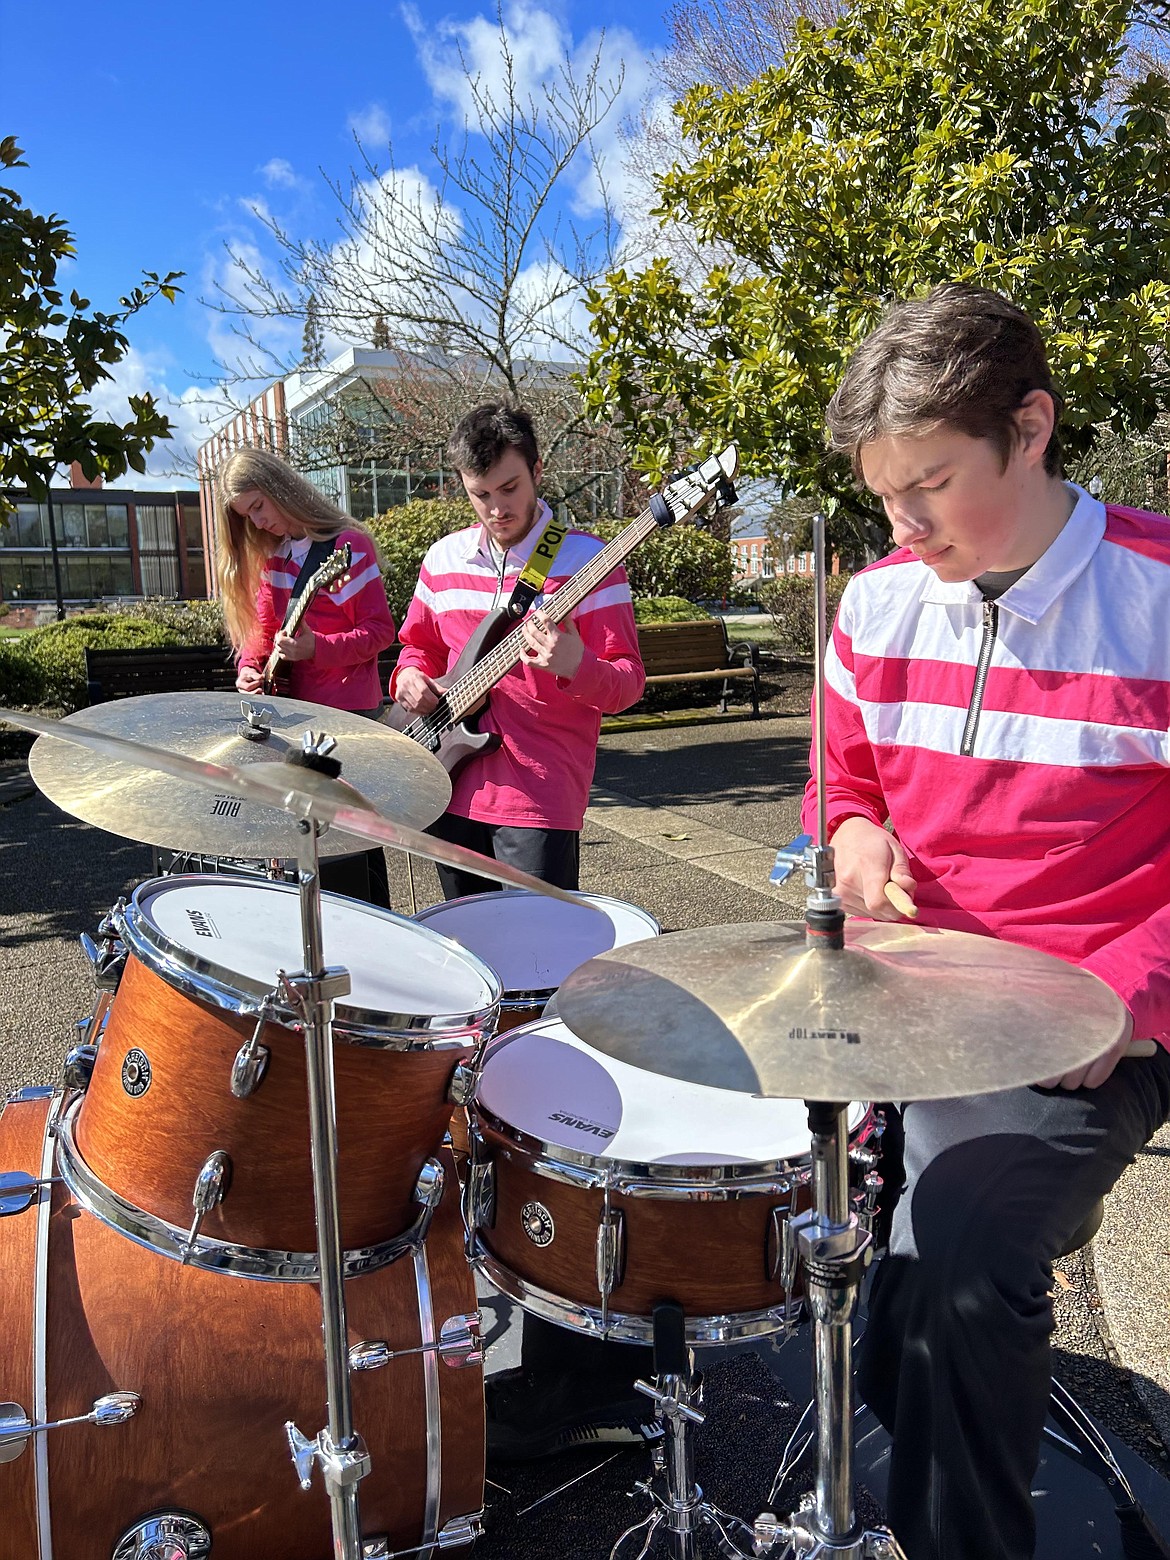 Viking Percussion has a wide array of instruments involved in their ensemble from drum sets to guitars. Instructor, John Owens, said he works to provide challenging pieces to students so that they are constantly improving as musicians.